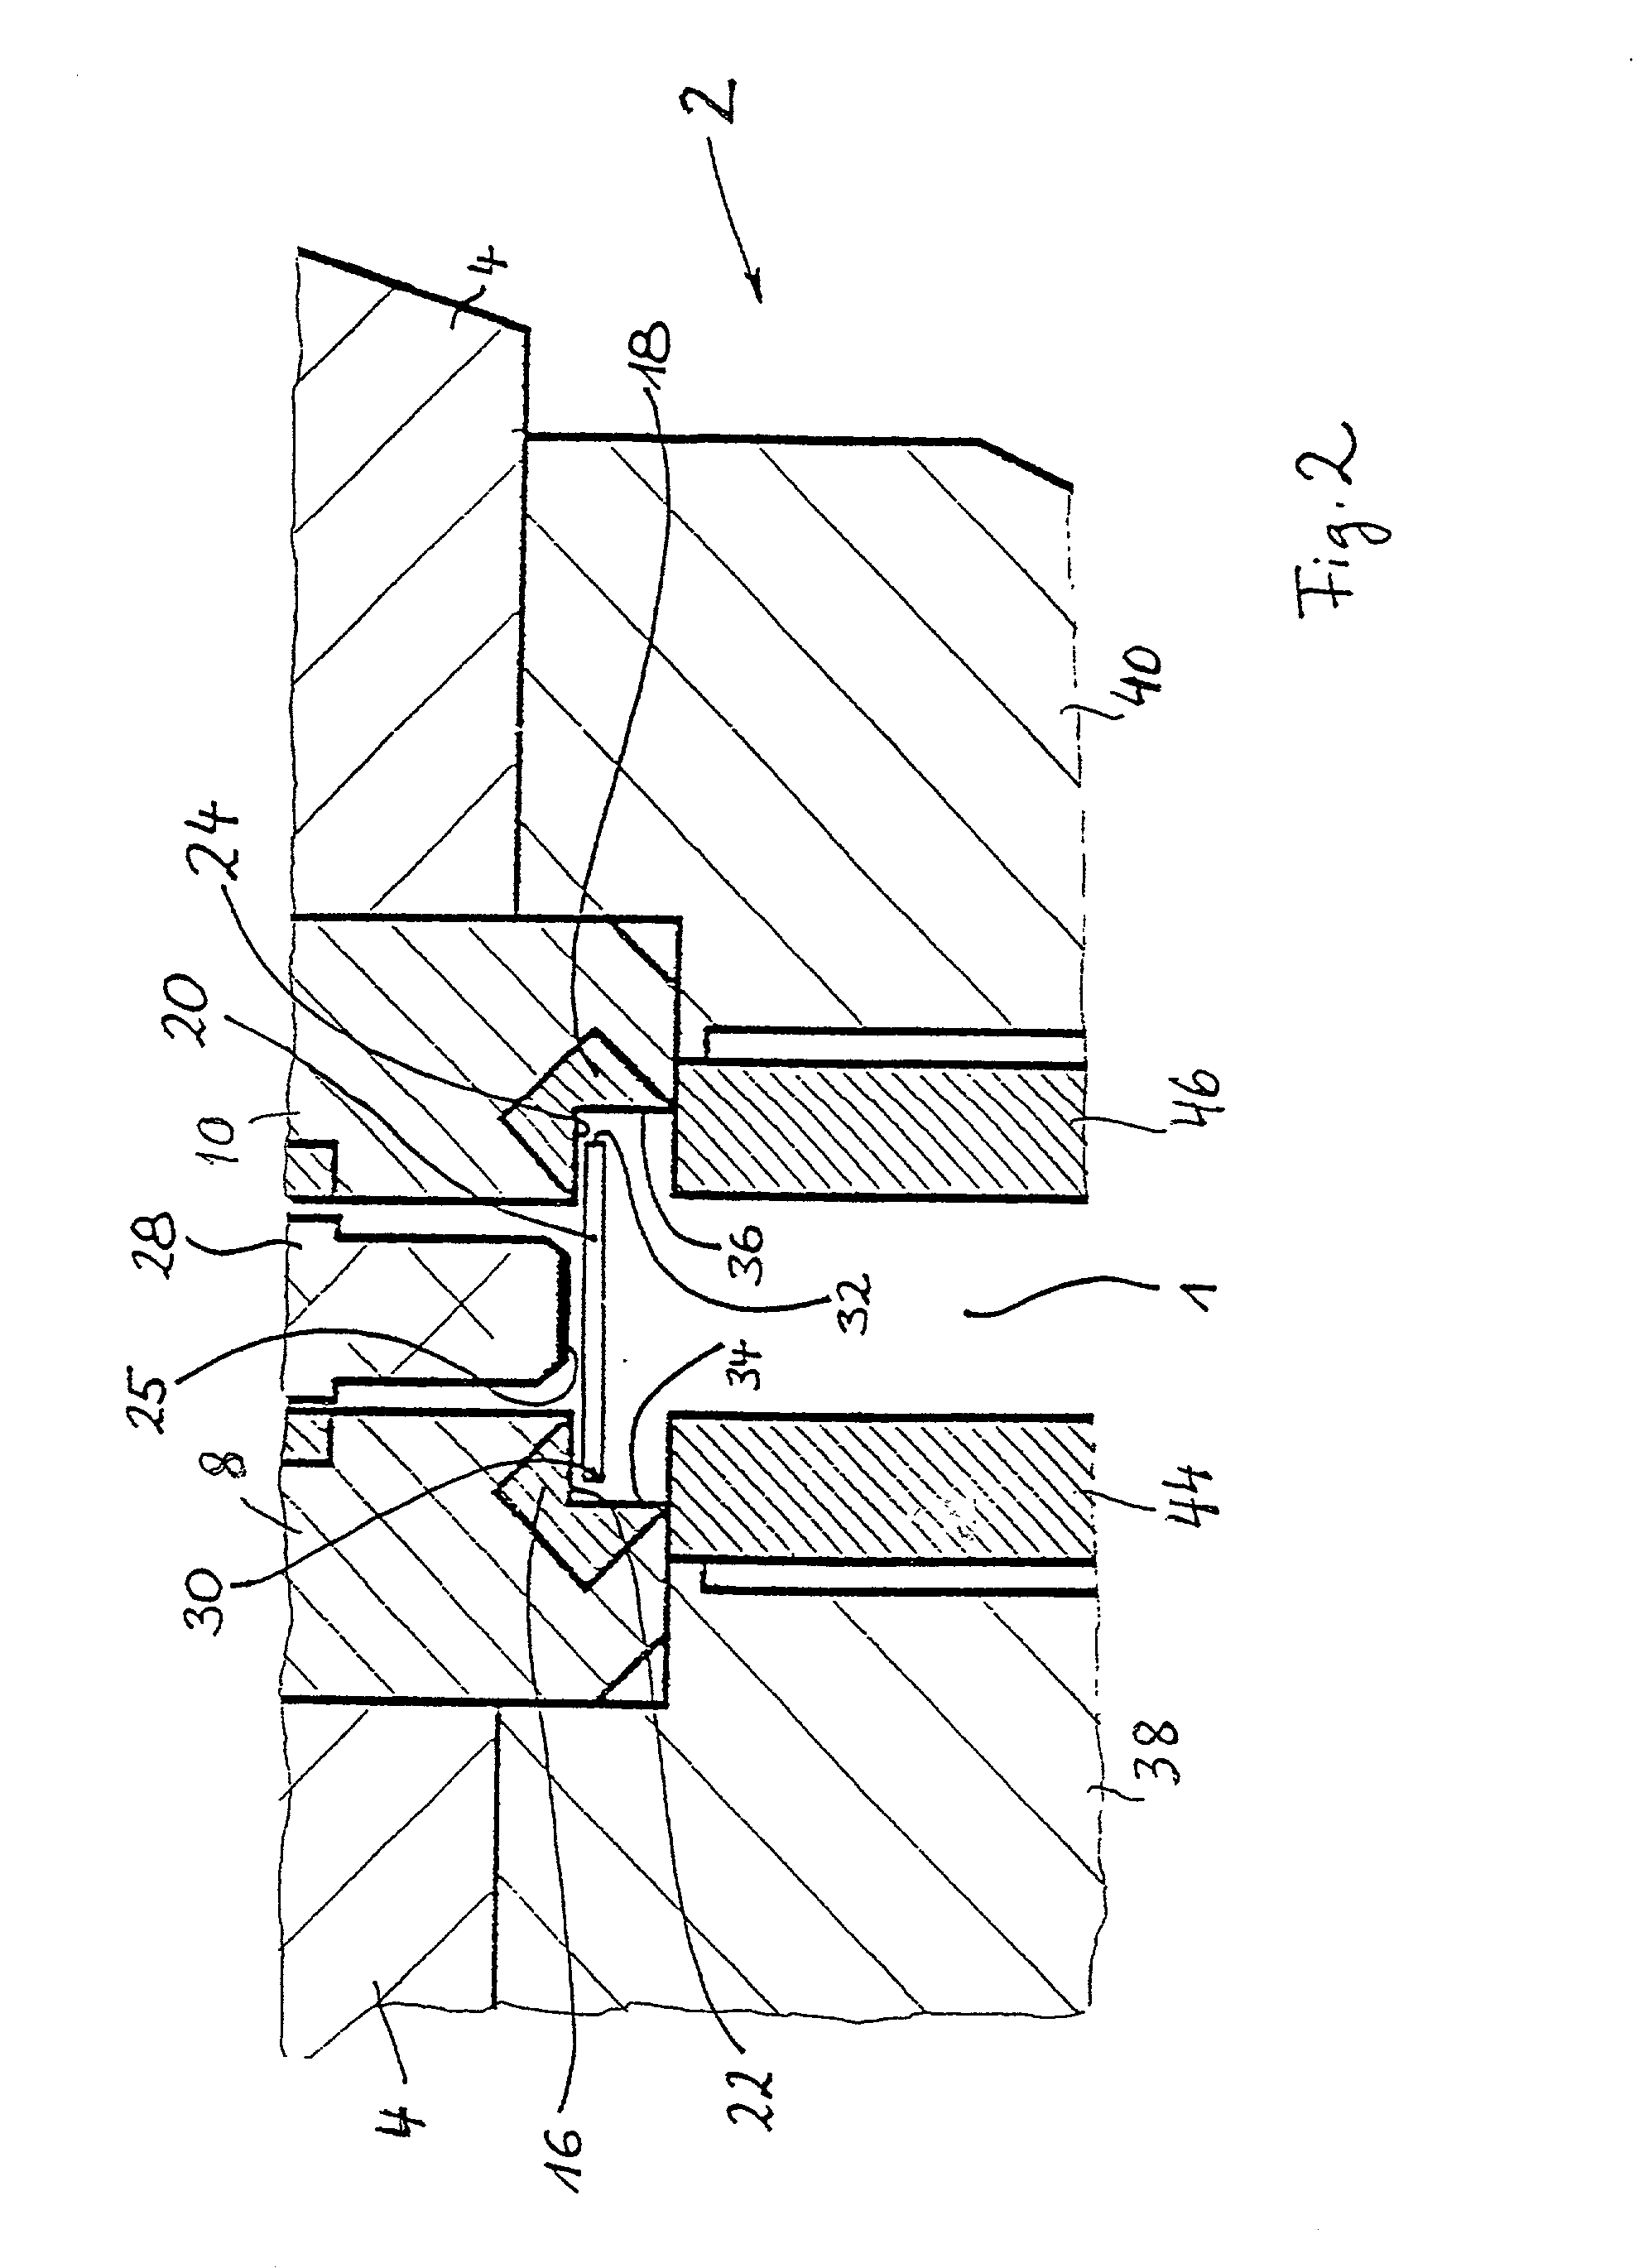 Apparatus for advancing streams of particles of smokable material